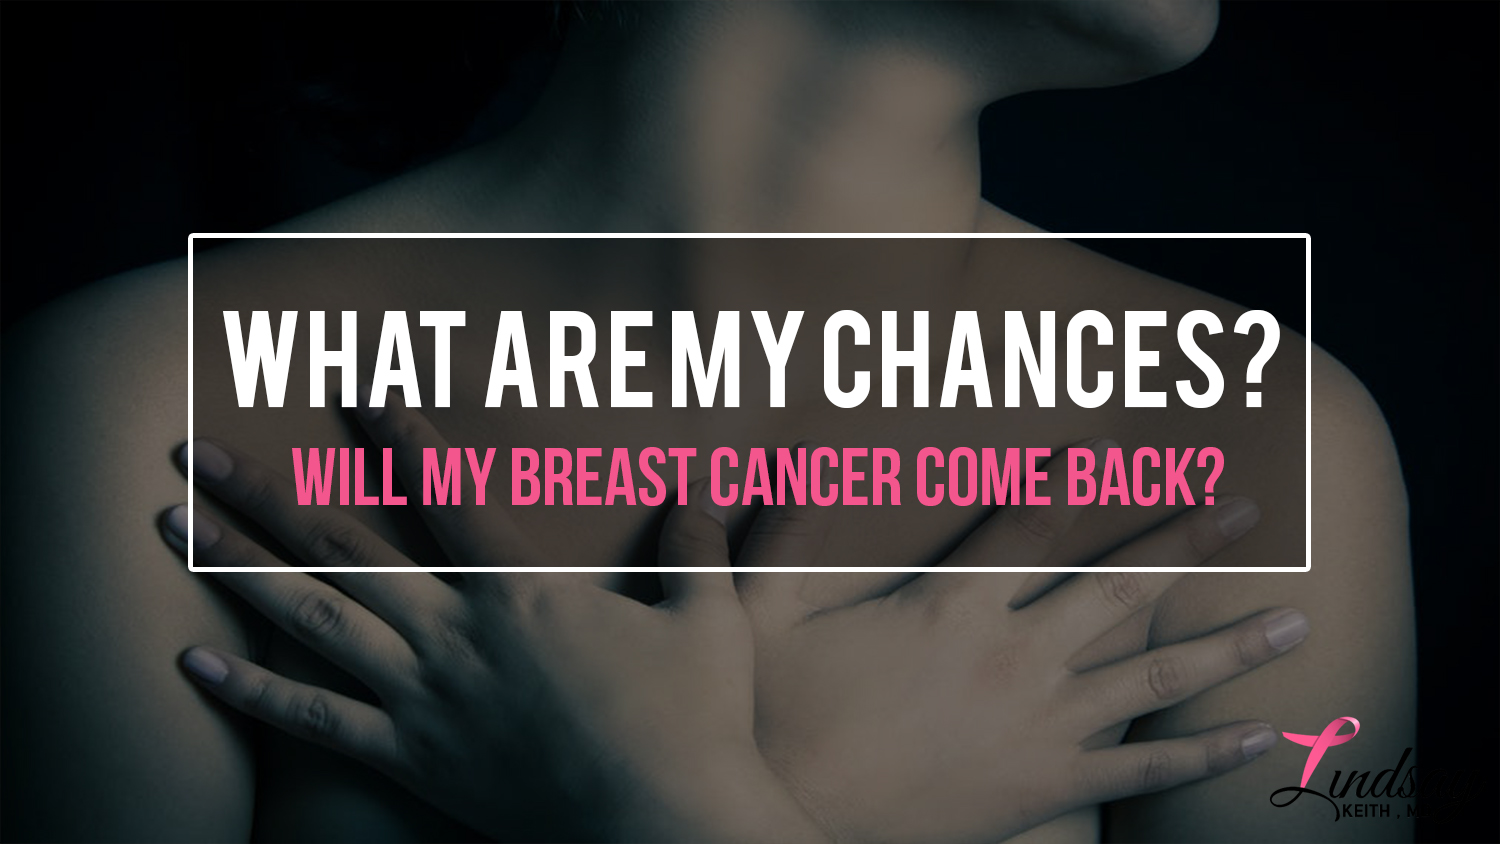 Will My Breast Cancer Come Back?